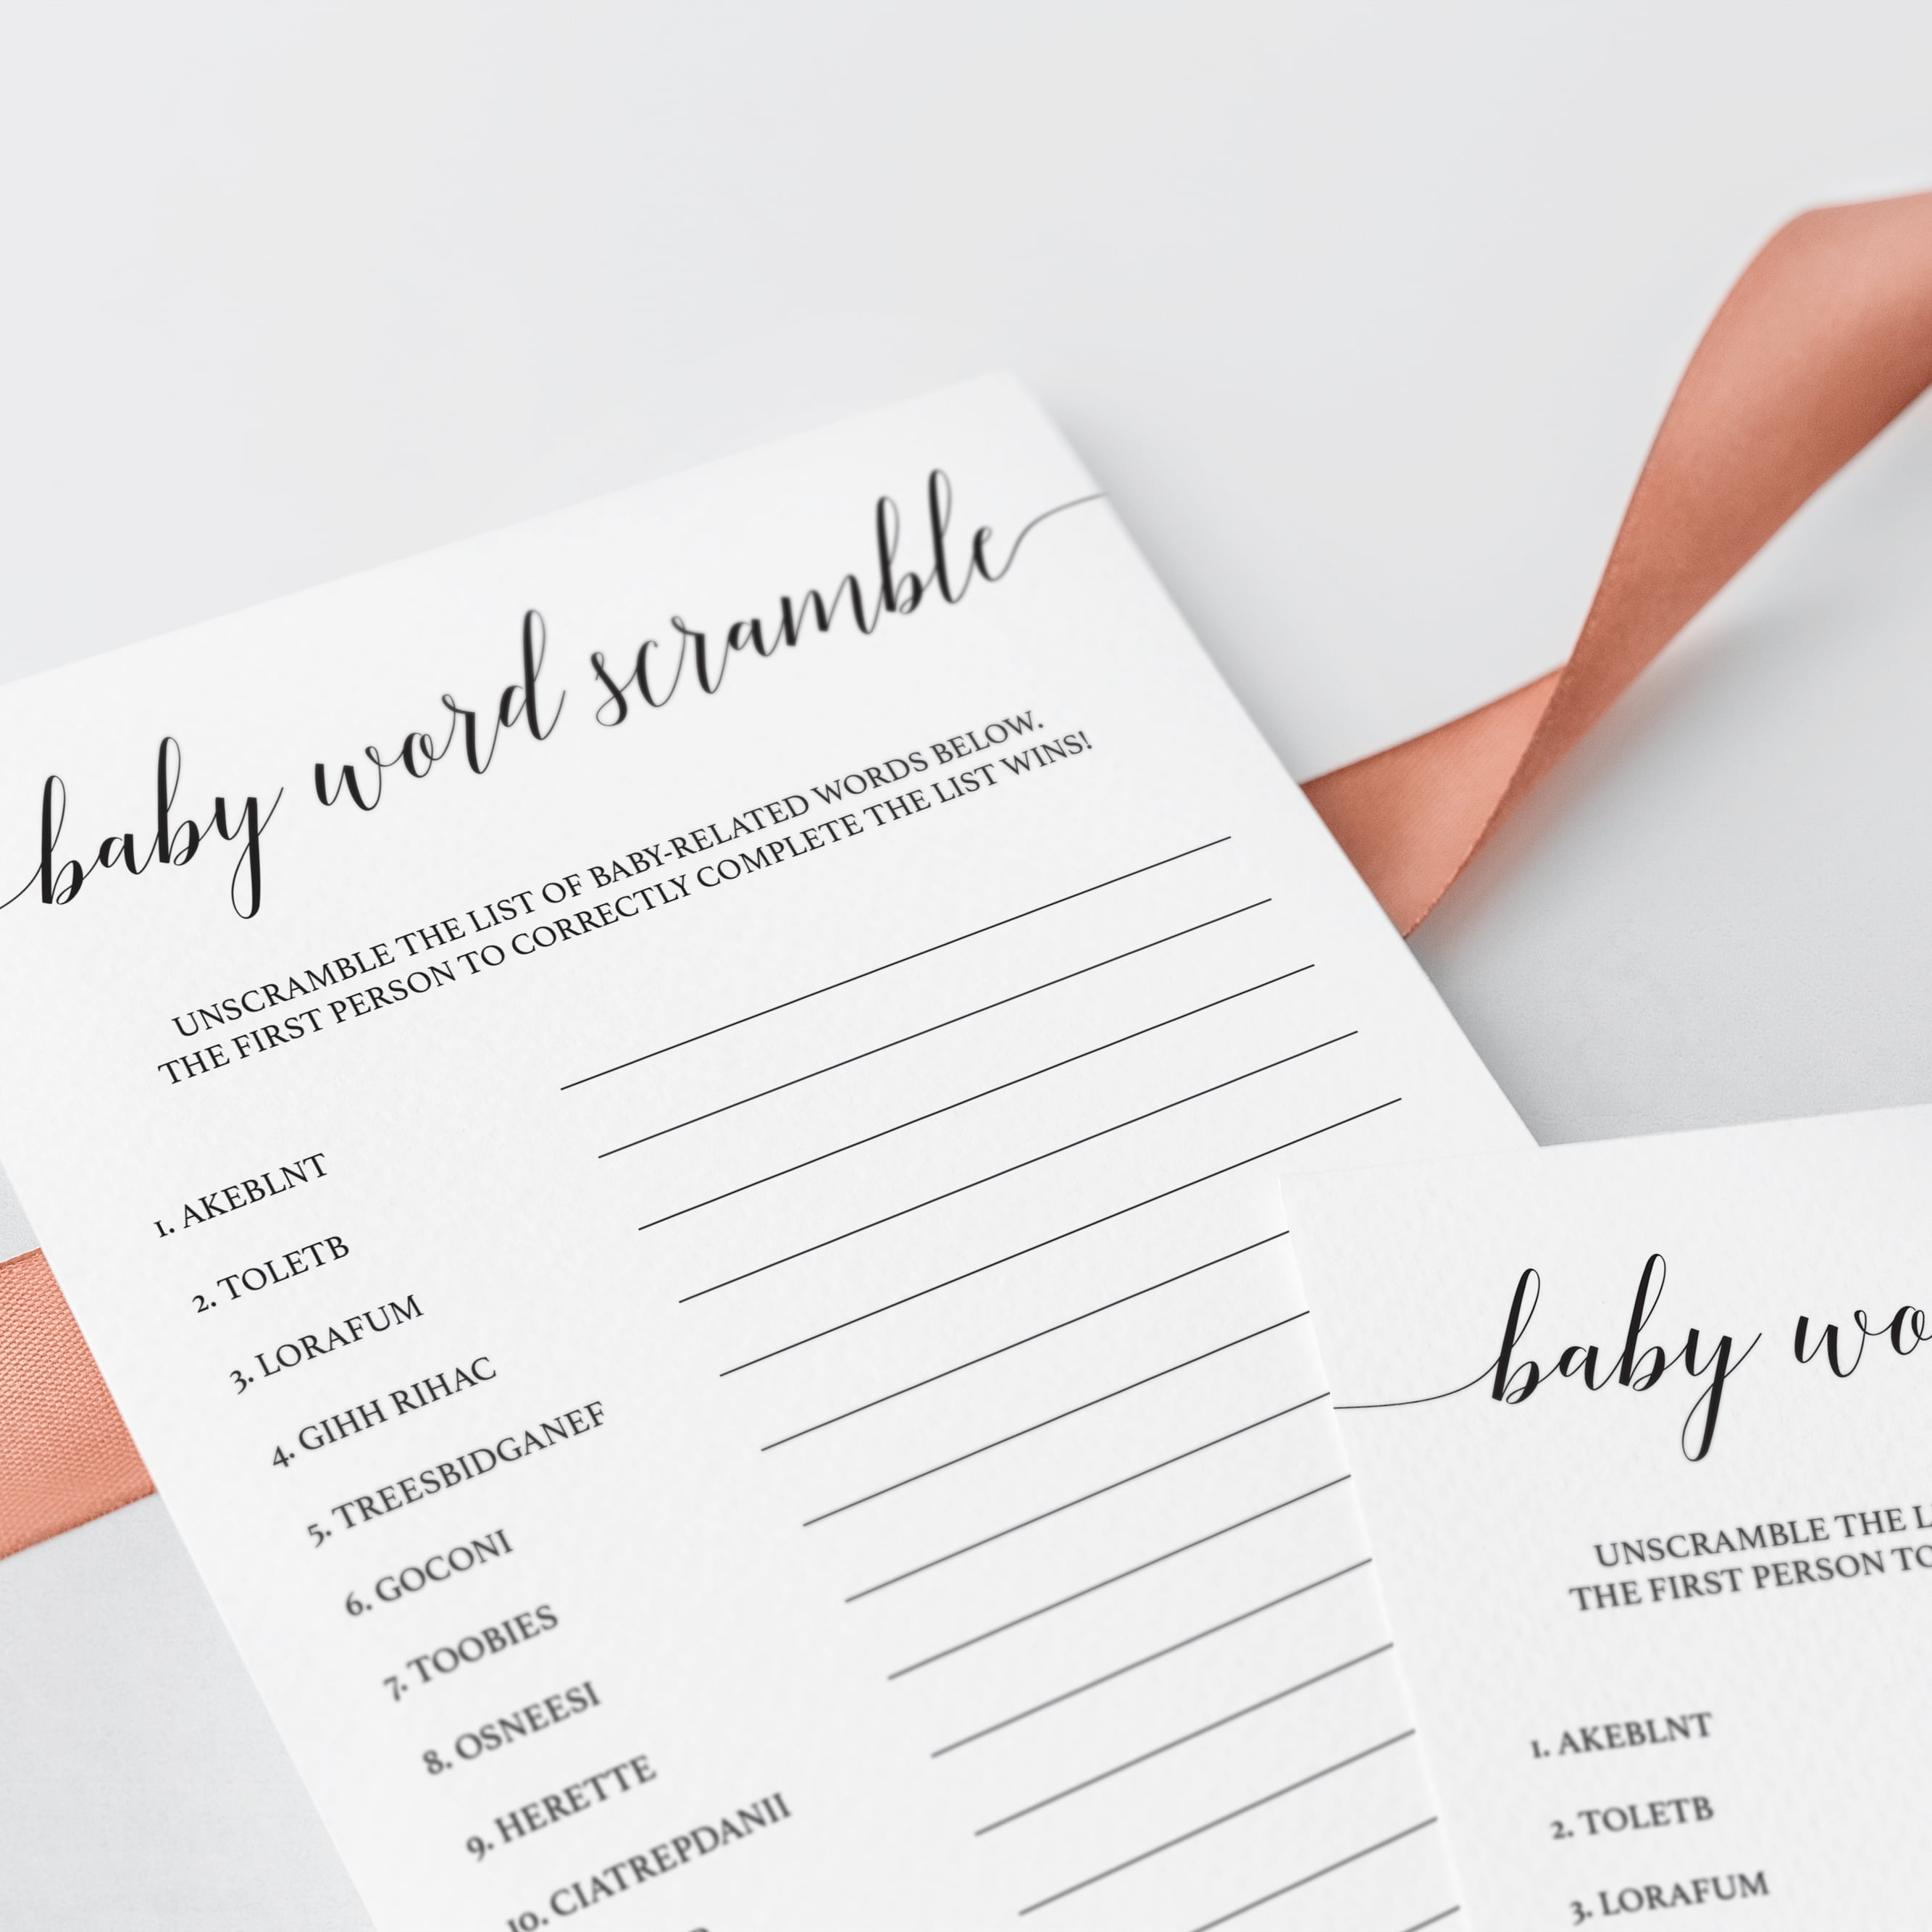 Simple baby word scramble printable by LittleSizzle